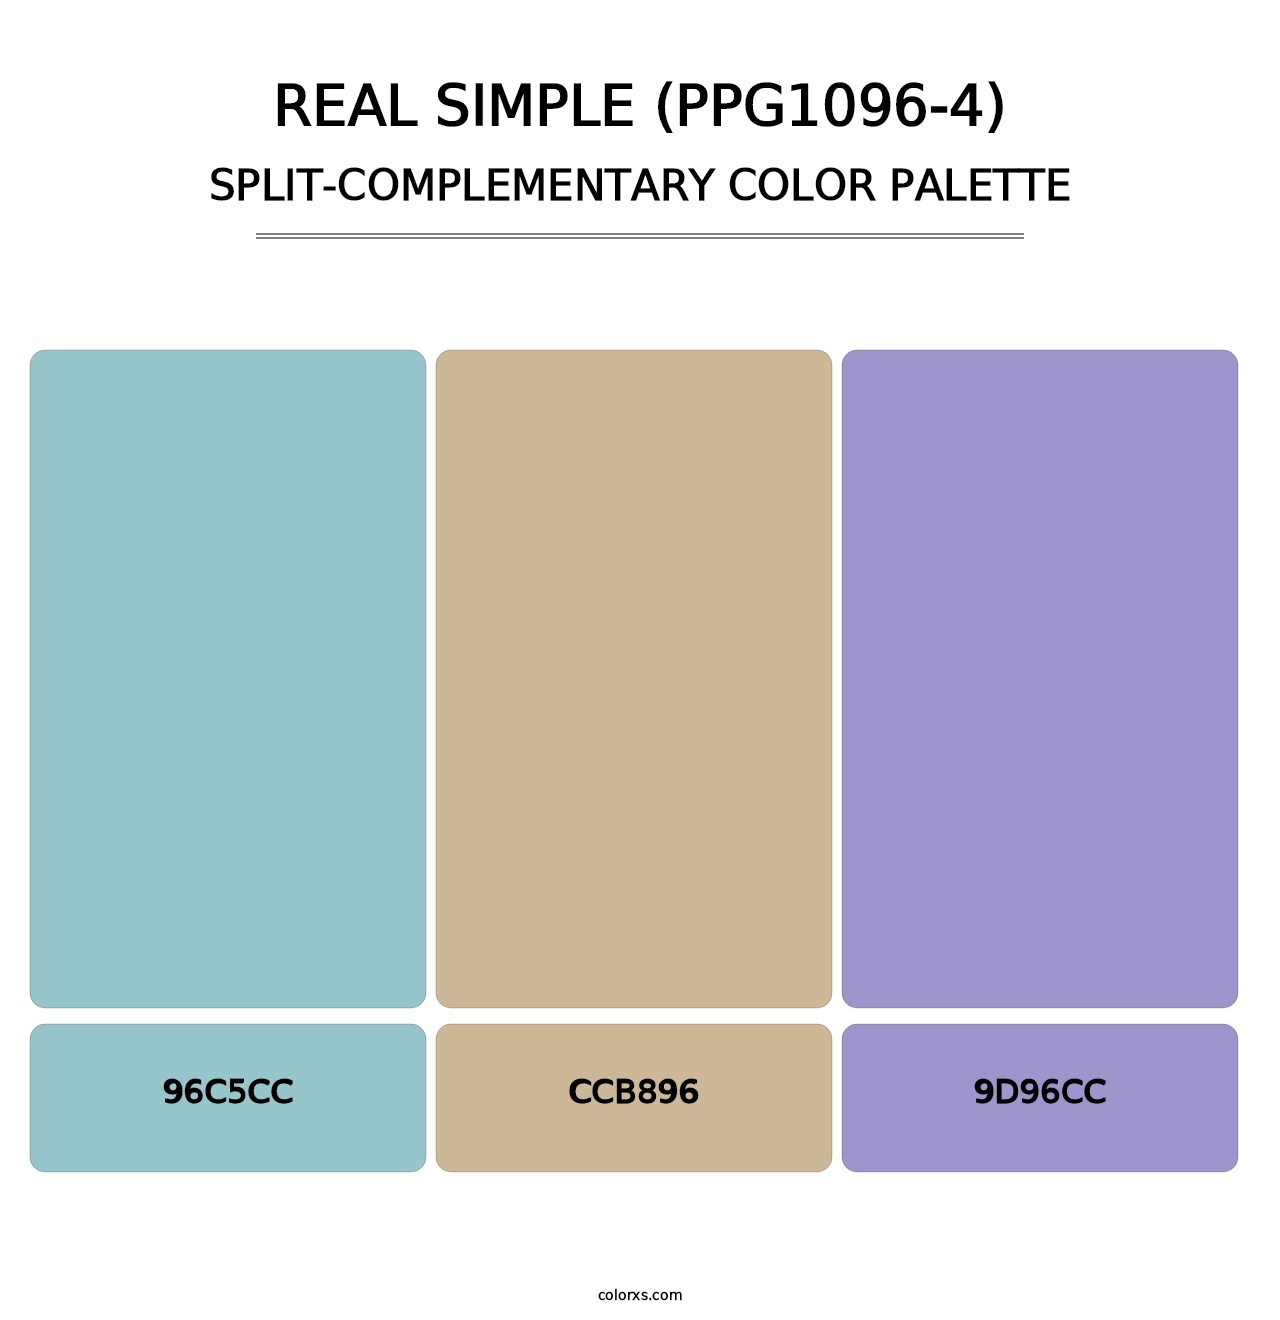 Real Simple (PPG1096-4) - Split-Complementary Color Palette